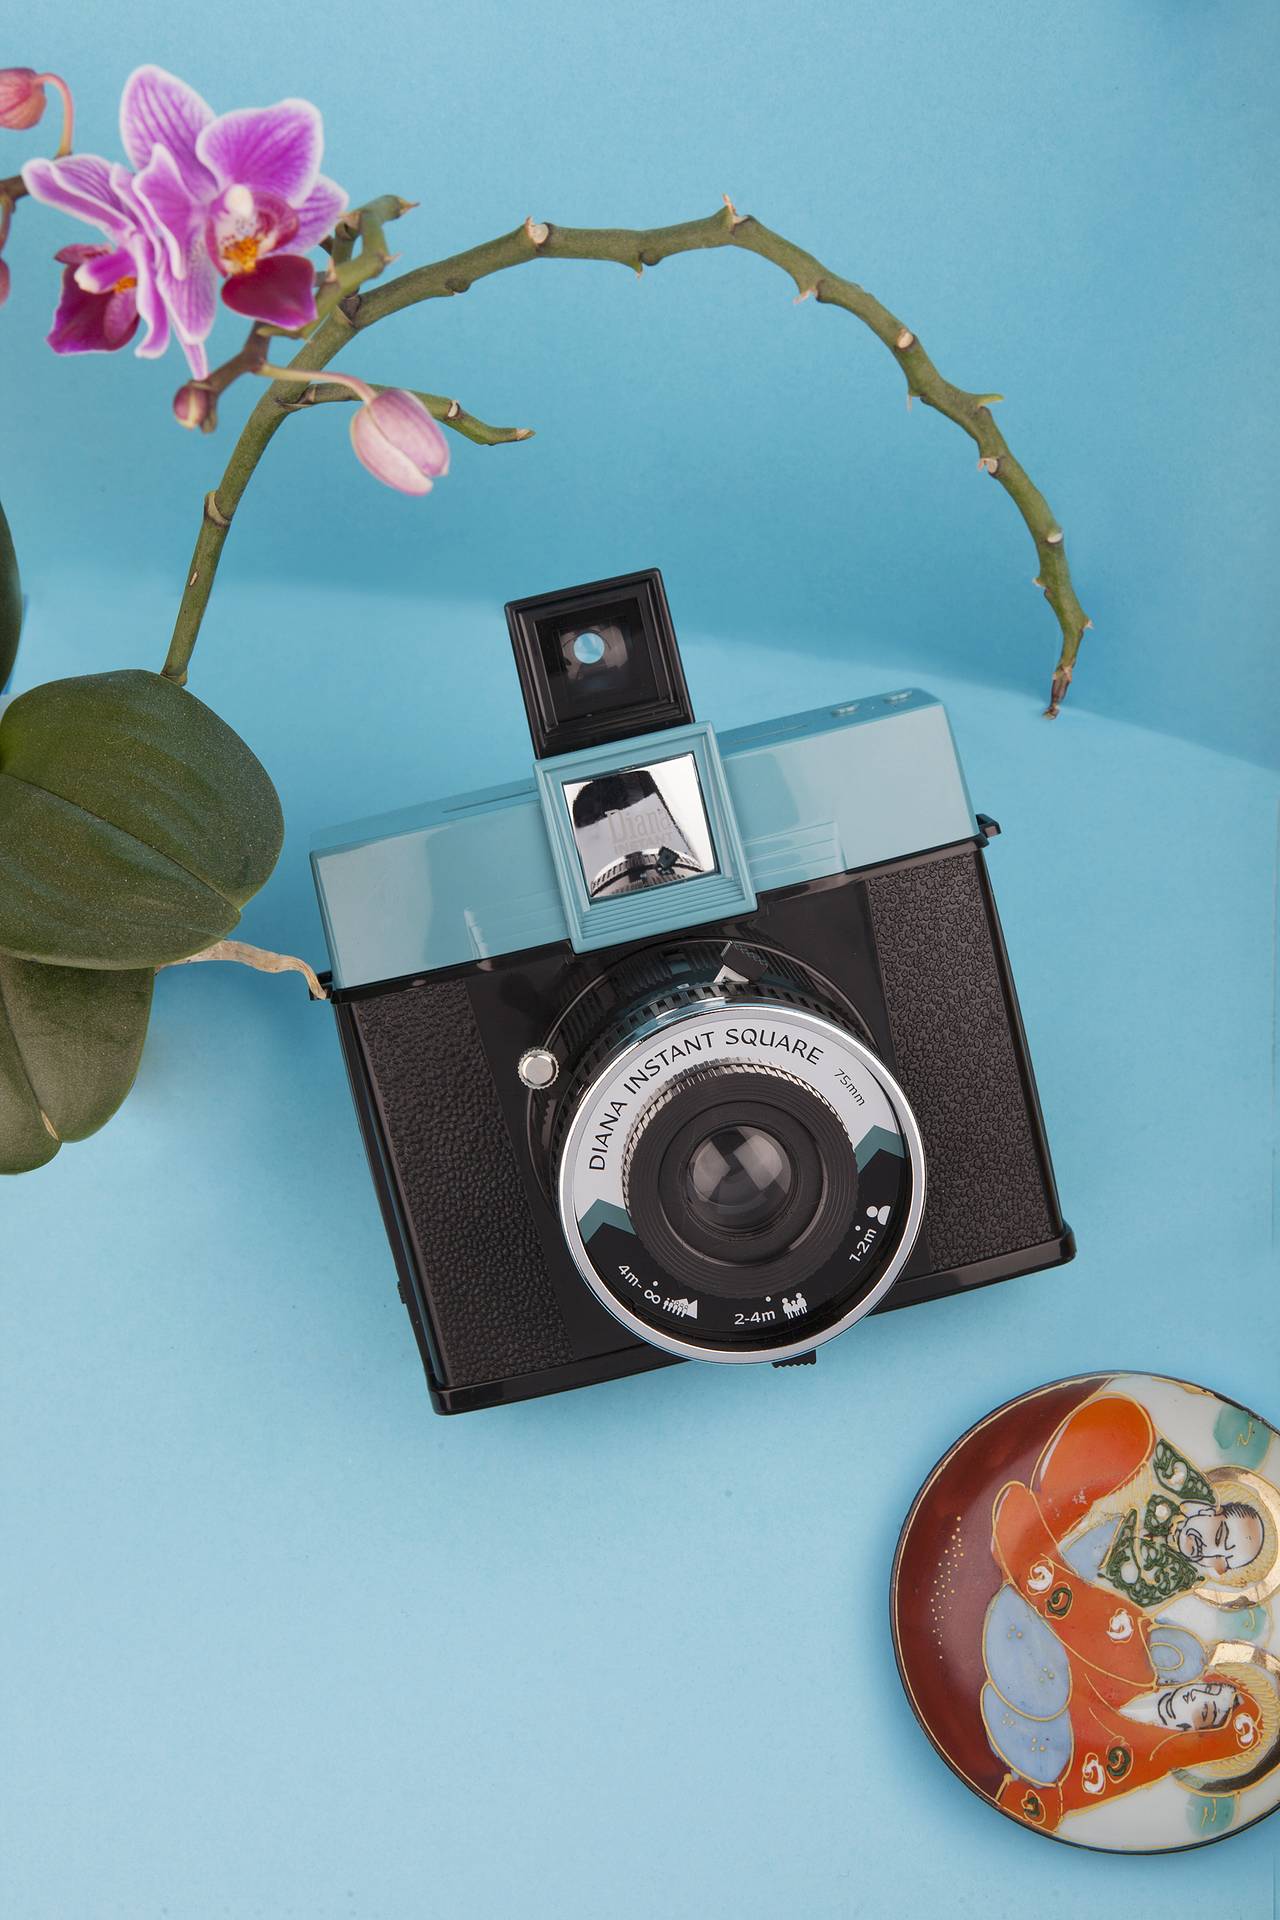 Experience the legendary Diana aesthetic of strong, saturated colors and rich, moody vignetting on Instax Square film with the Diana Instant Square.